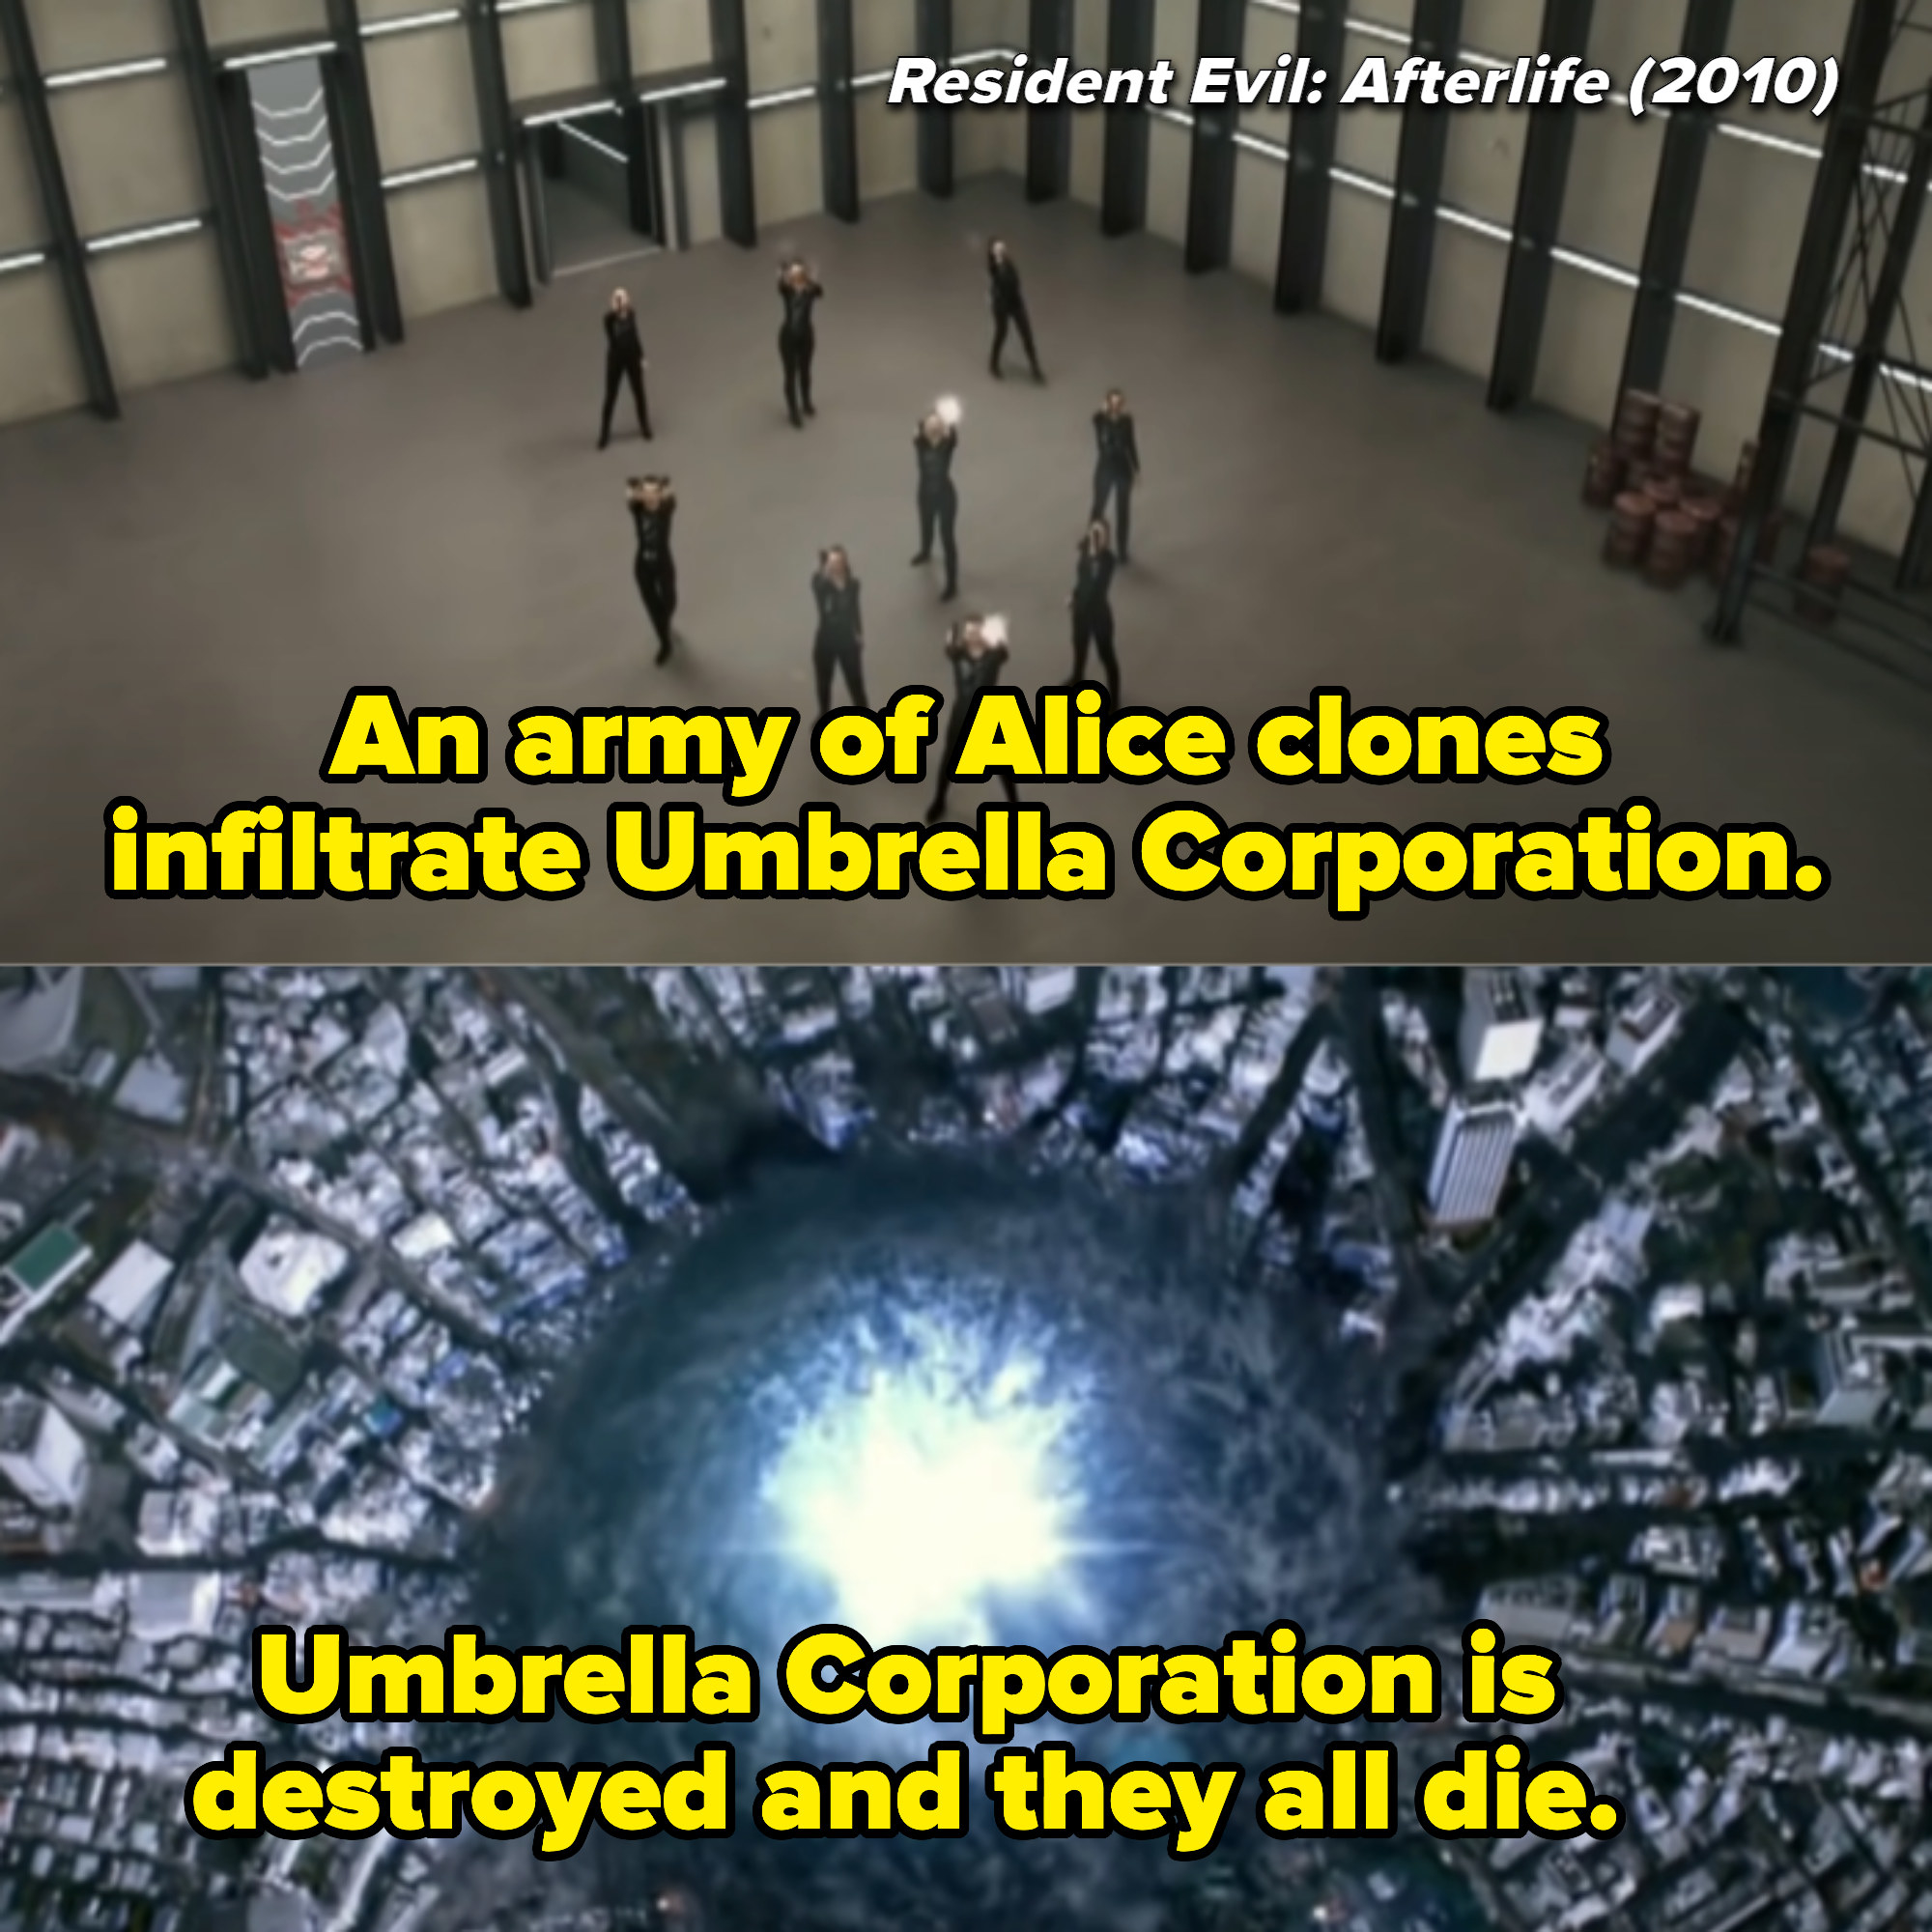 Screen shots from &quot;Resident Evil: Afterlife&quot;